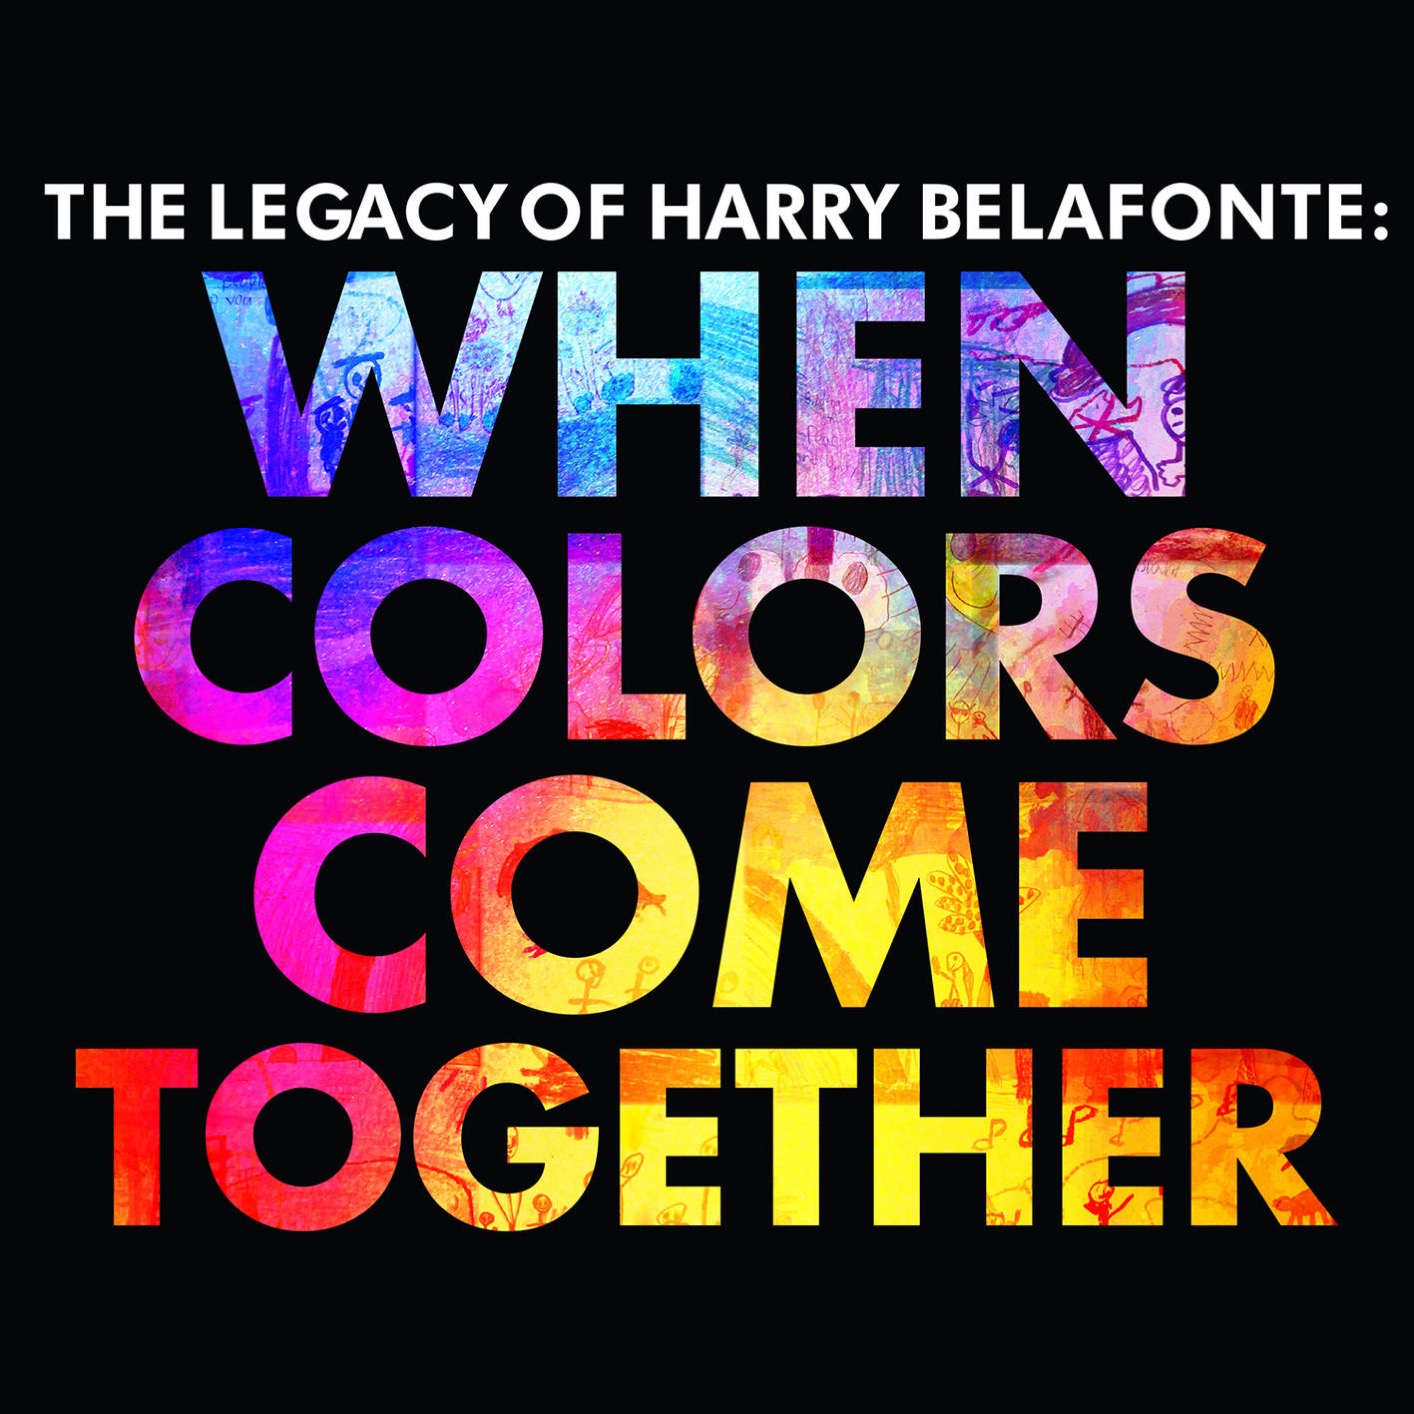 Harry Belafonte - The Legacy of Harry Belafonte: When Colors Come Together (2017) [FLAC 24bit/96kHz]